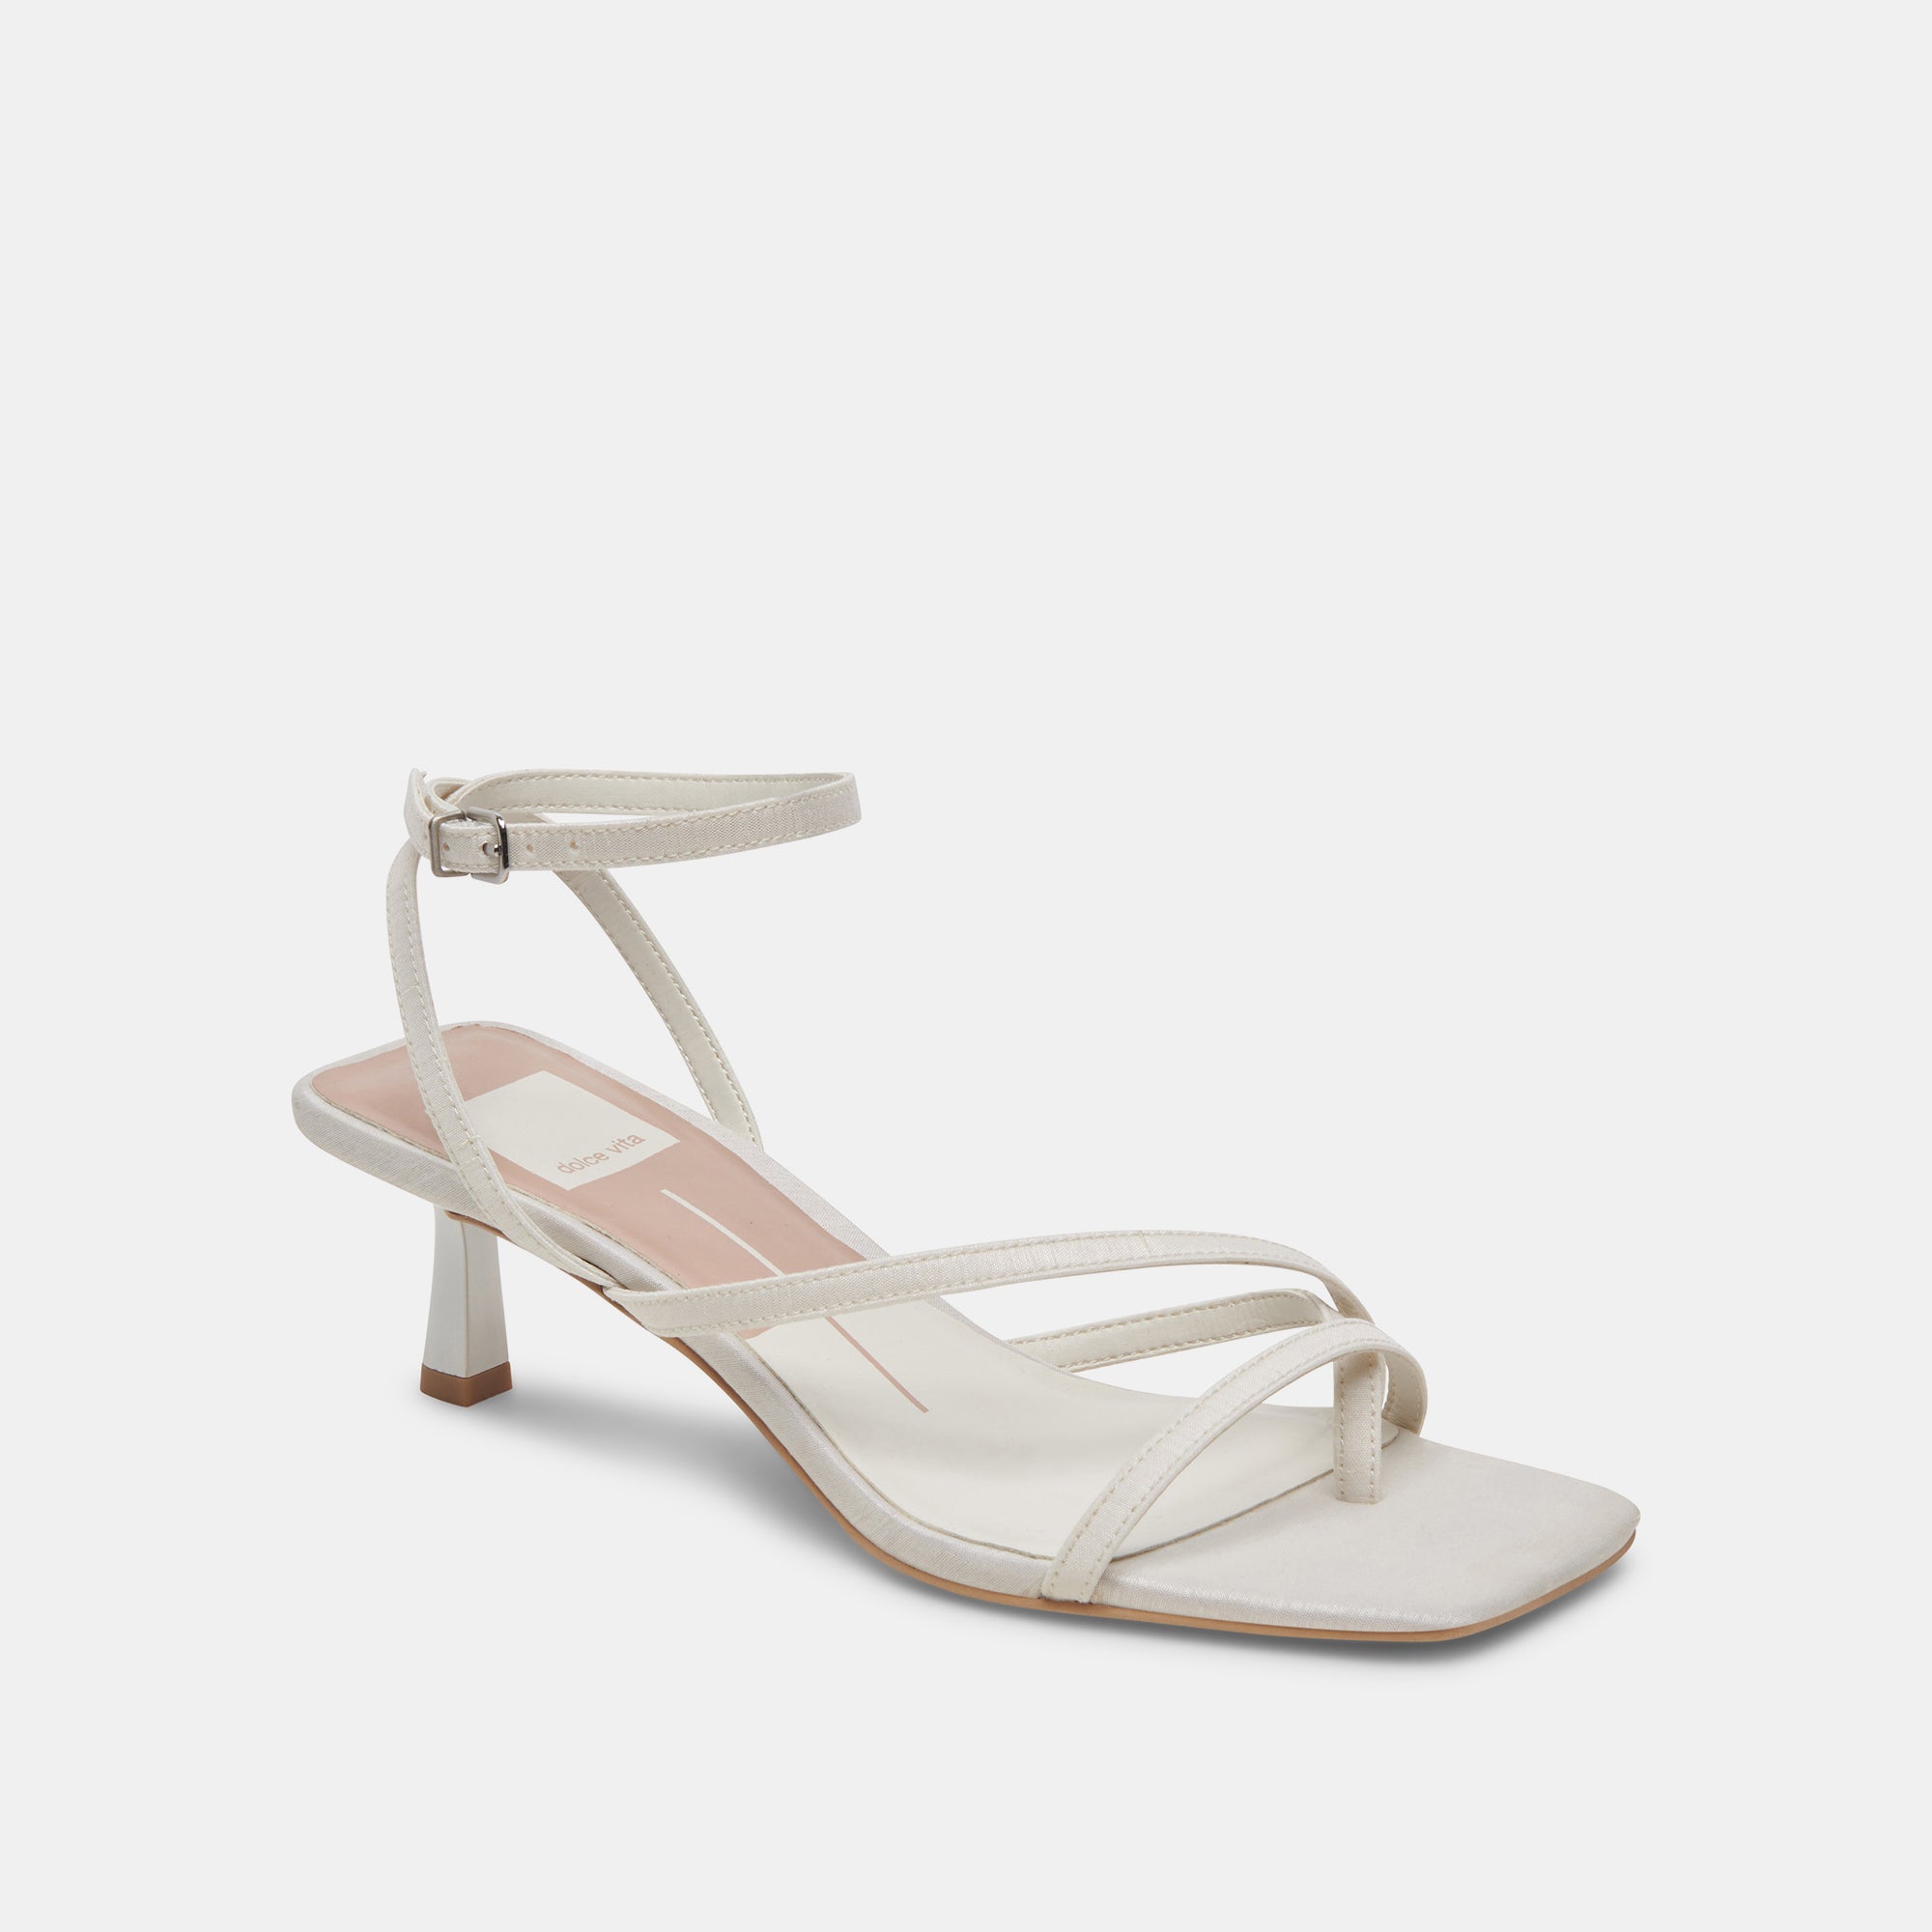 ASOS DESIGN Nalo knotted heeled mules in off white | ASOS